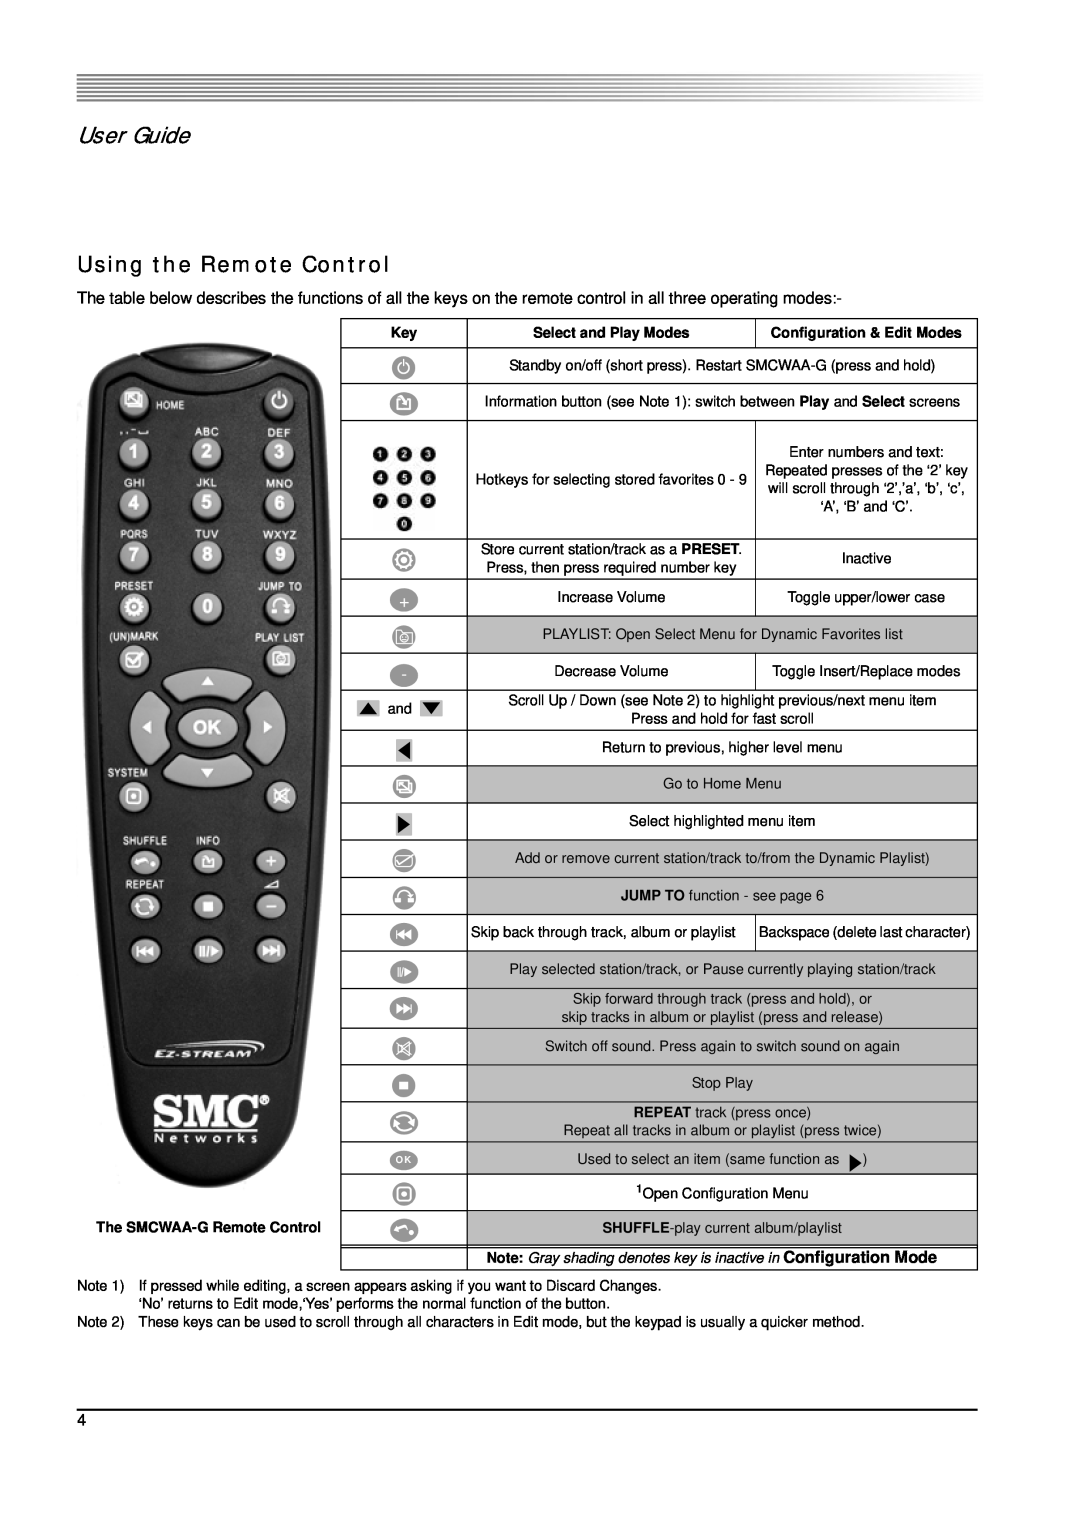 SMC Networks 802.11g manual Using the Remote Control, User Guide, Select and Play Modes, Configuration & Edit Modes 